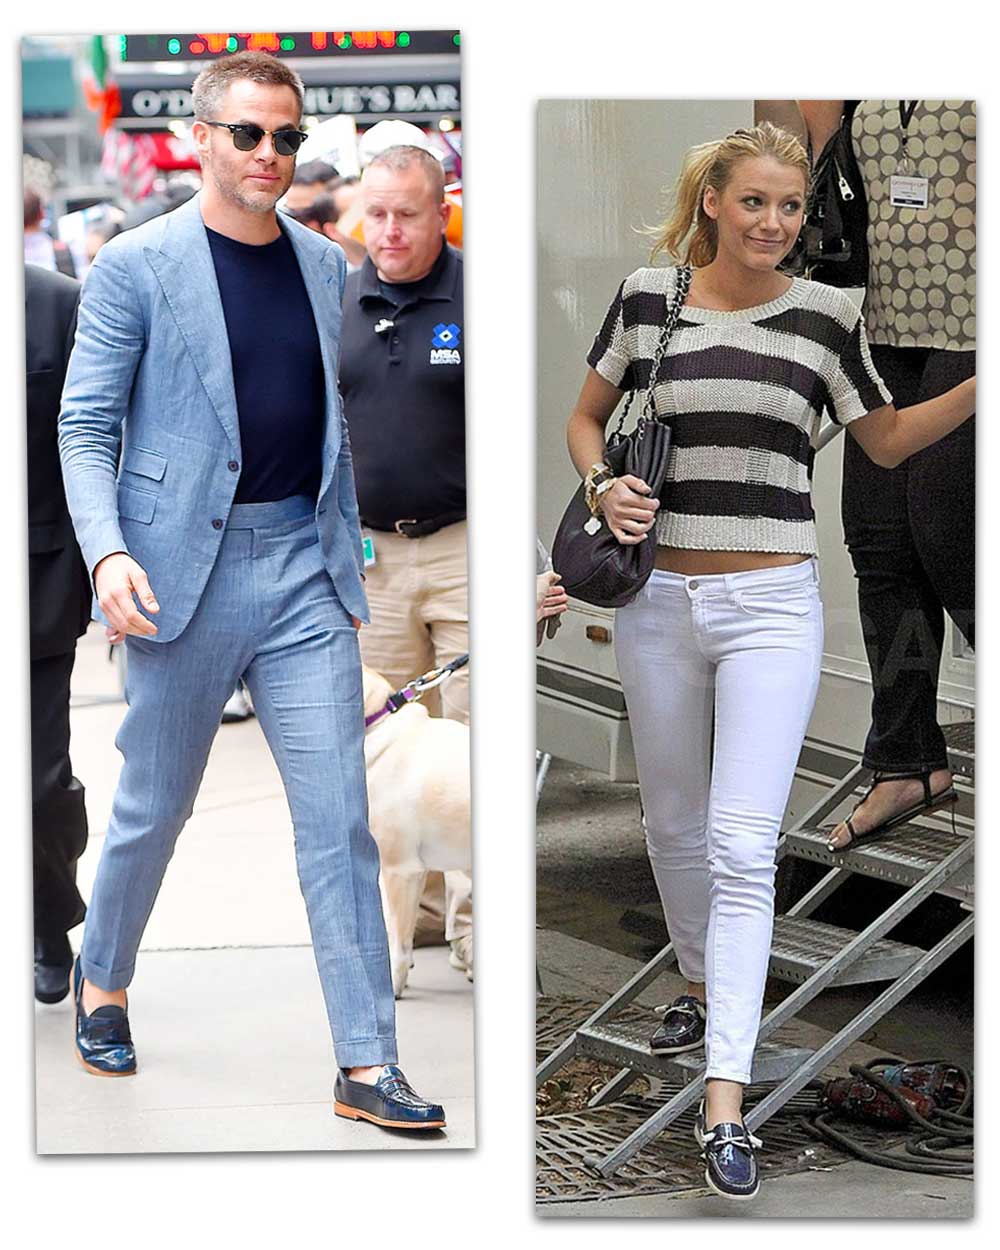 Preppy boat shoes on Blake Lively Chris Pine